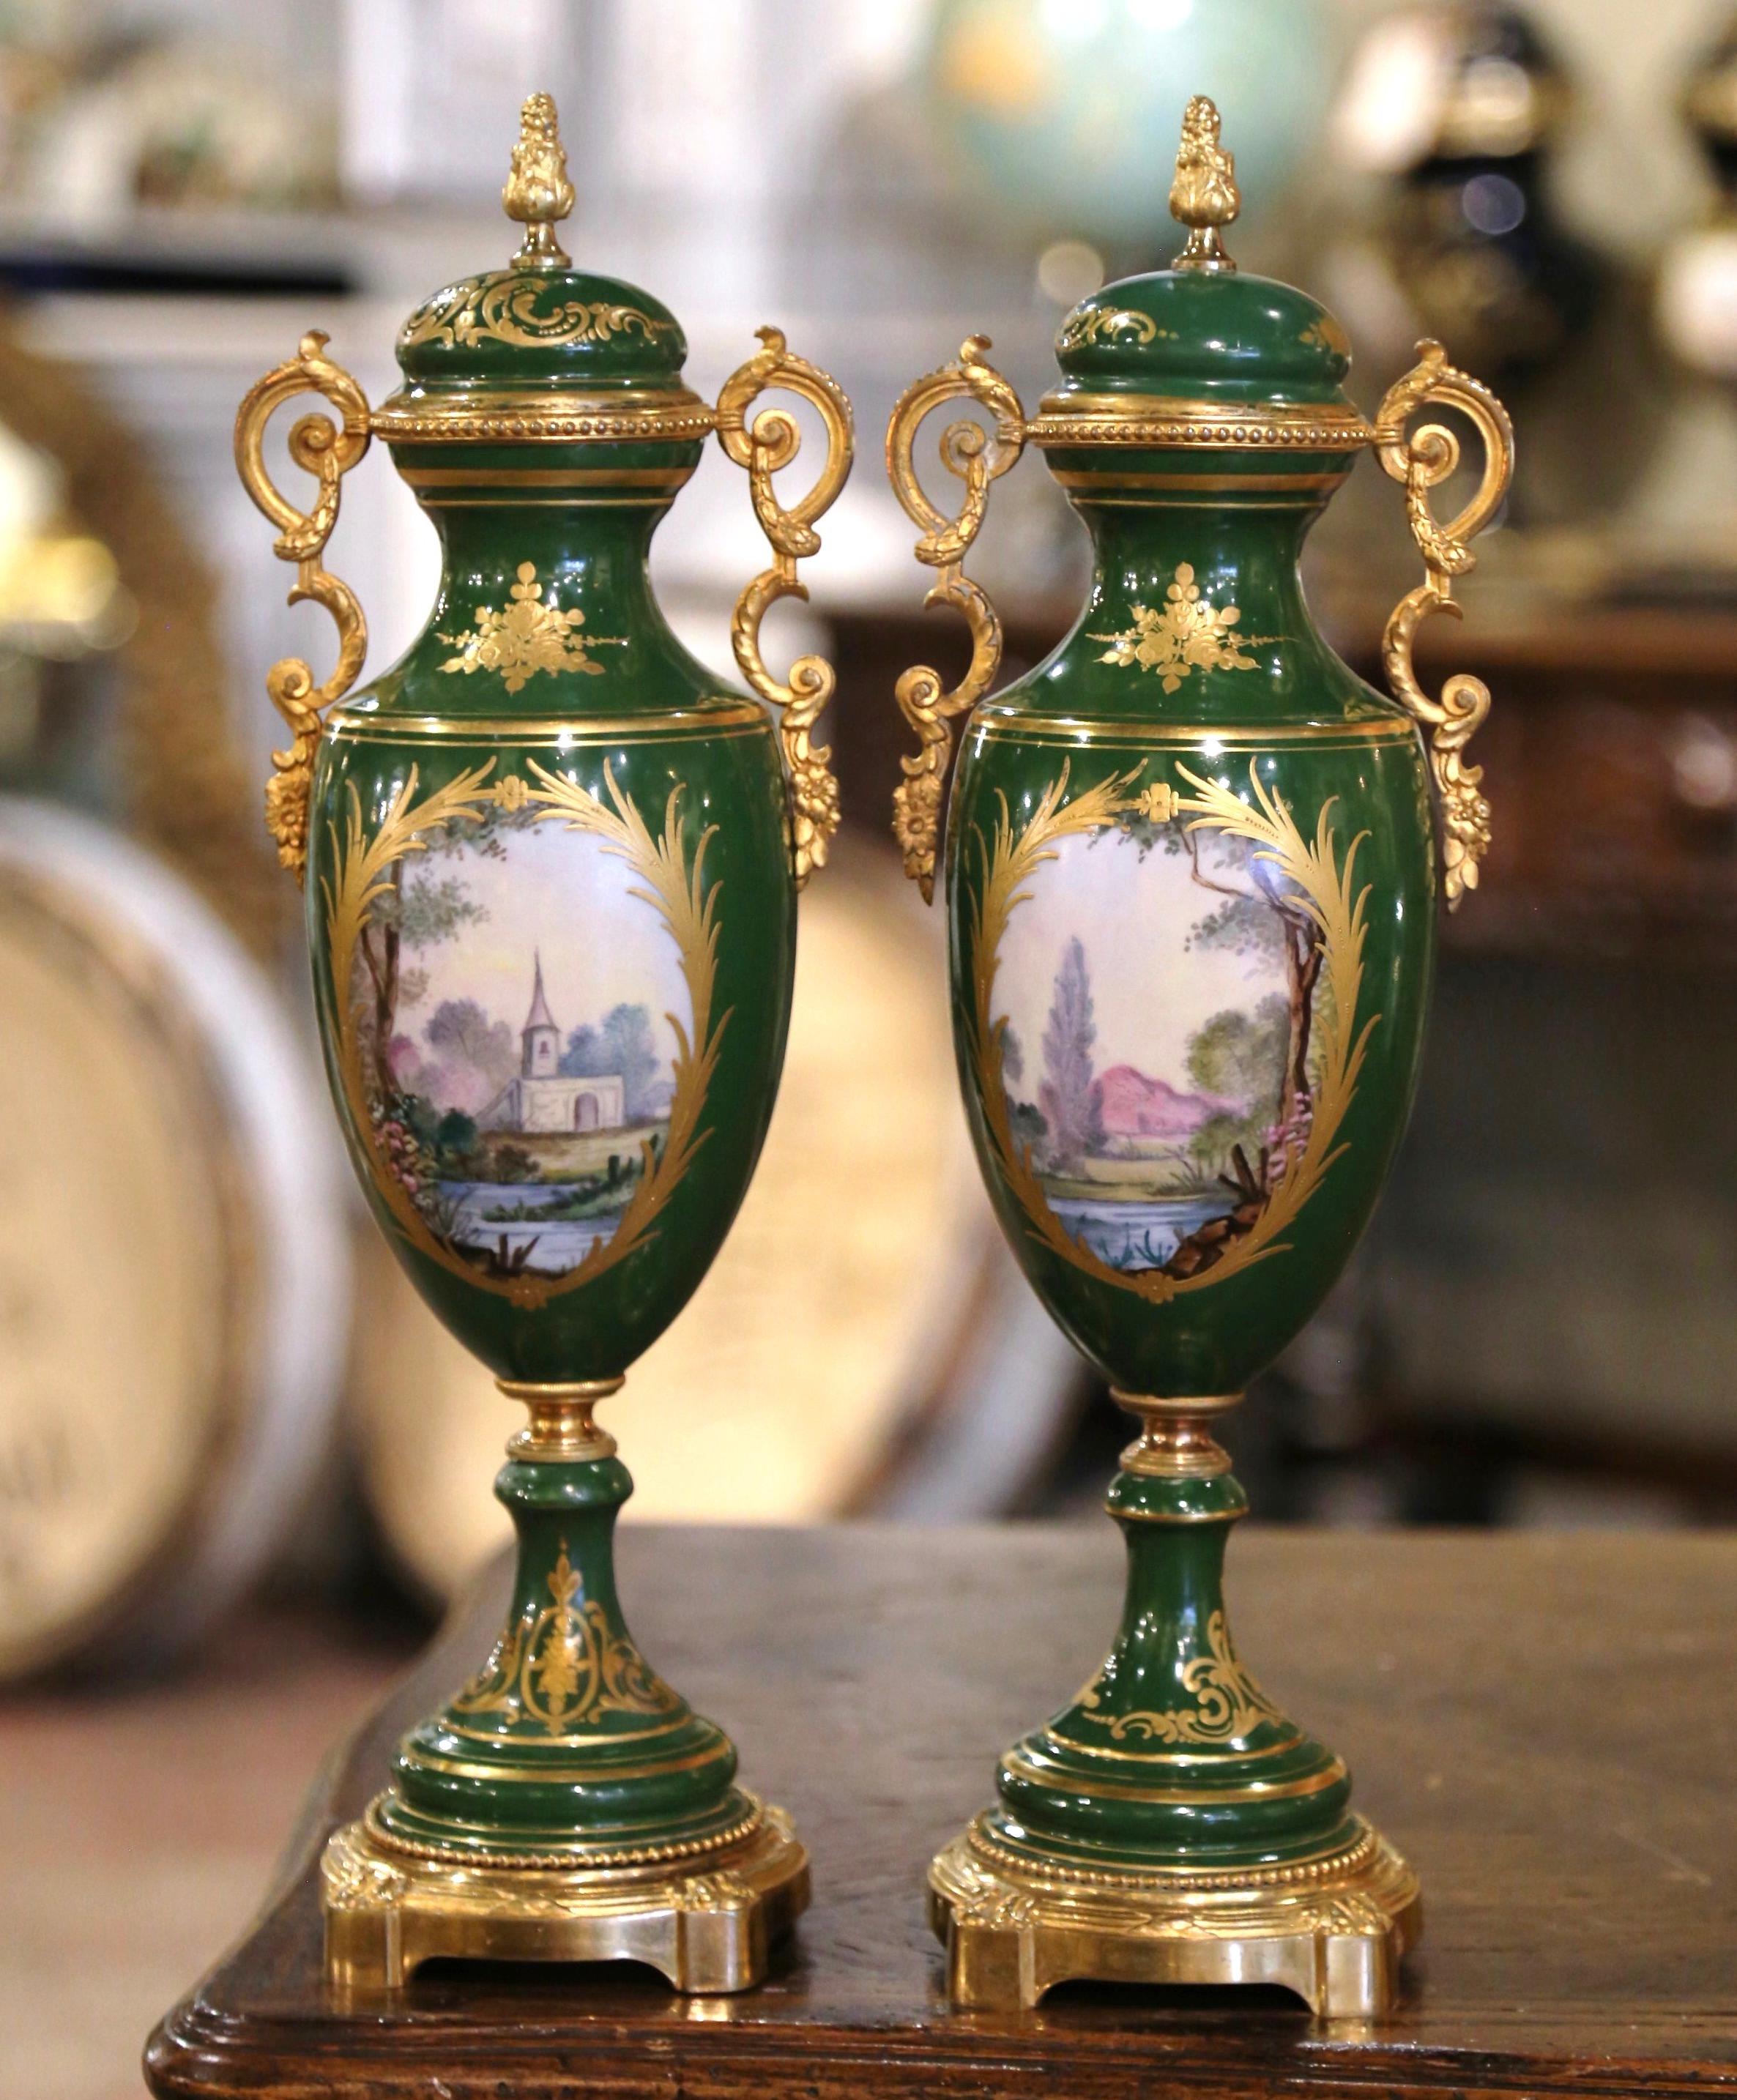 Pair of 19th Century French Sevres Gilt Metal and Painted Porcelain Covered Urns For Sale 8